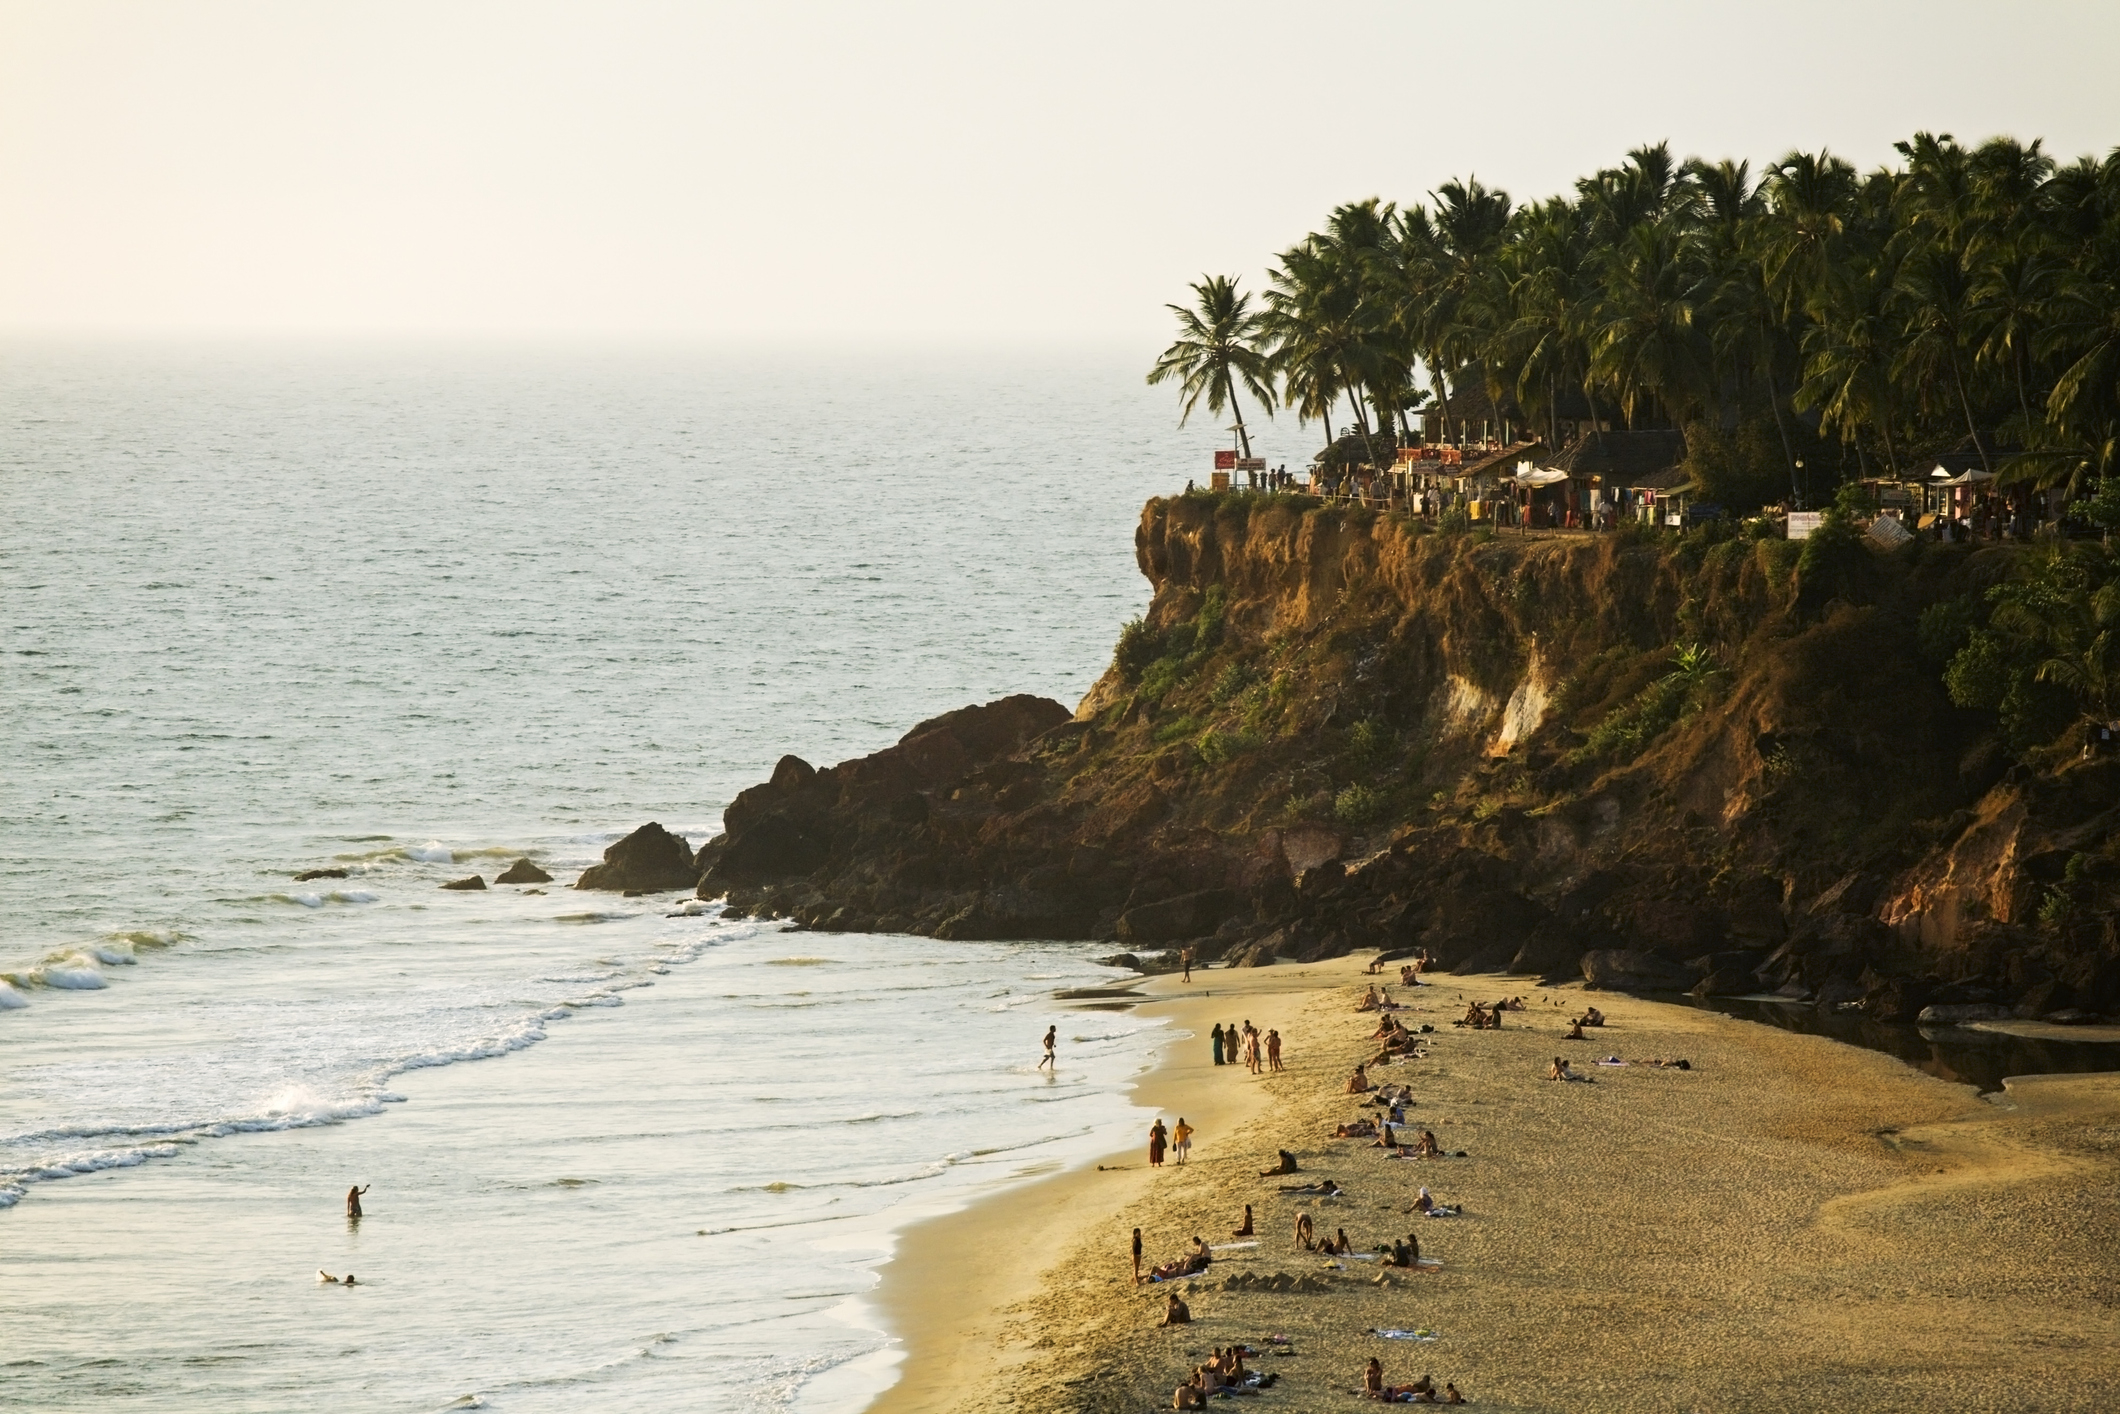 Tropical beach with people, palm trees, and cliffside cafe at sunset